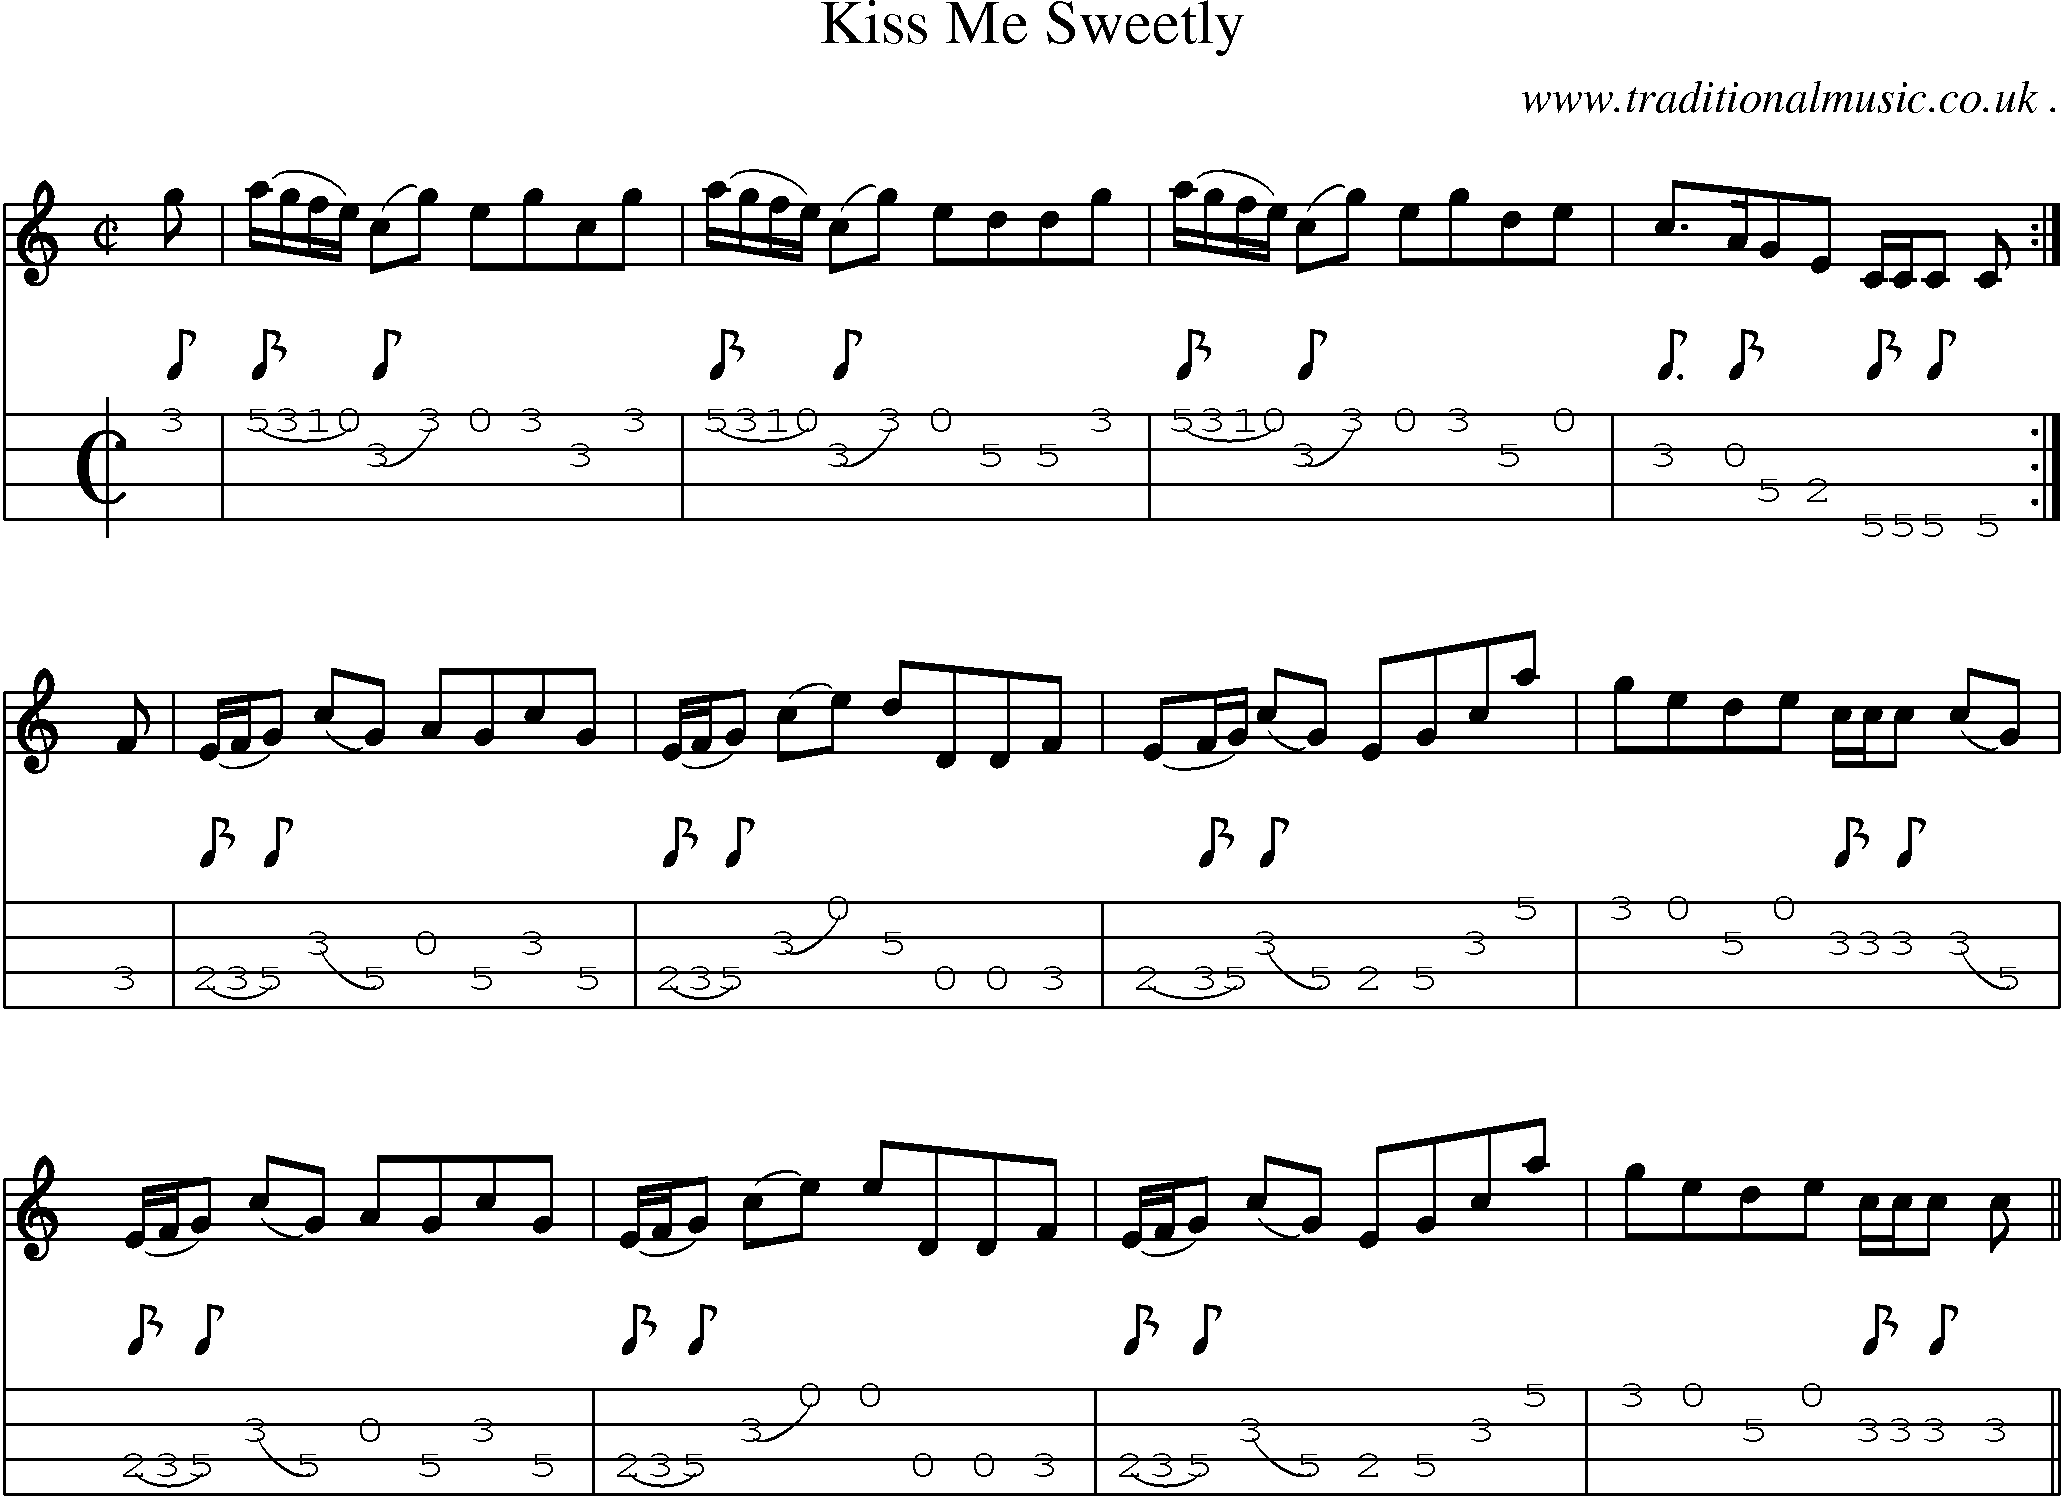 Sheet-music  score, Chords and Mandolin Tabs for Kiss Me Sweetly